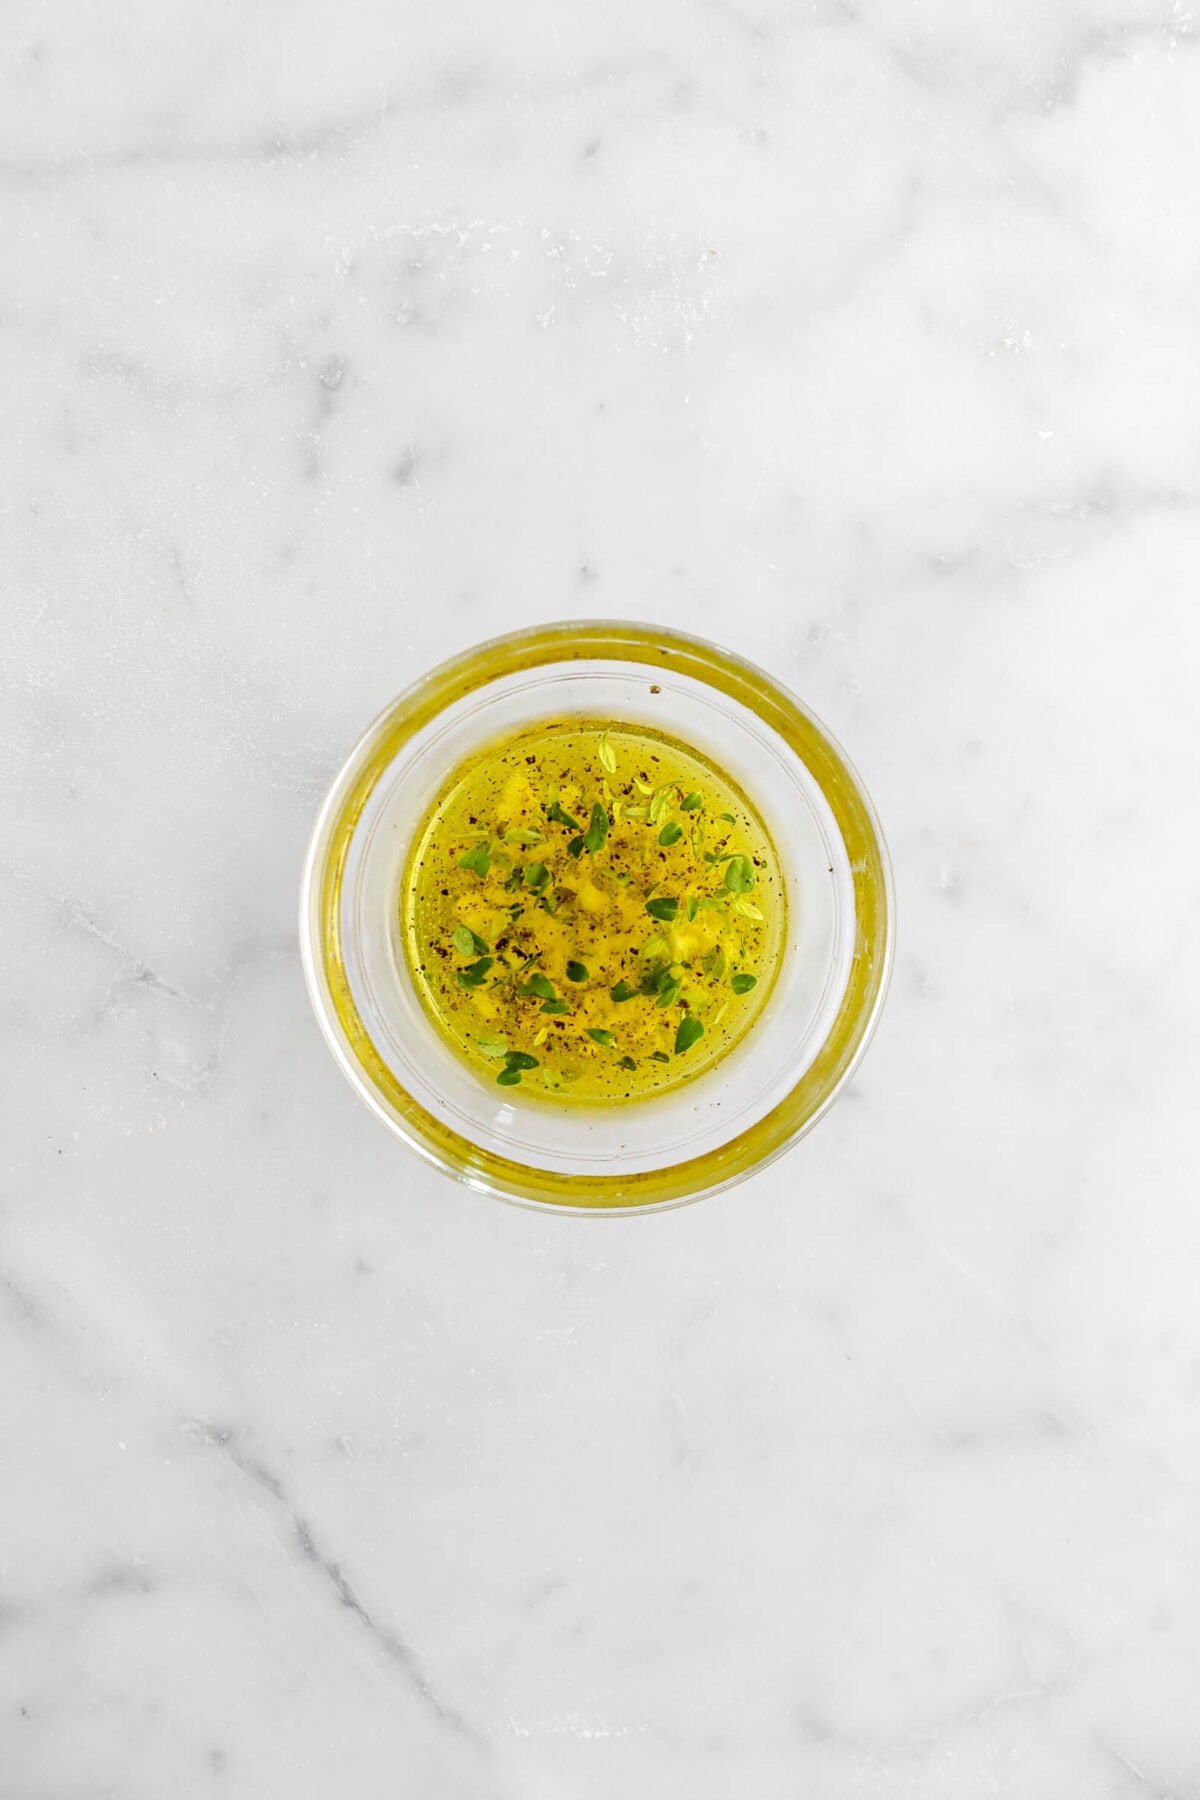 olive oil mixture in glass bowl on marble surface